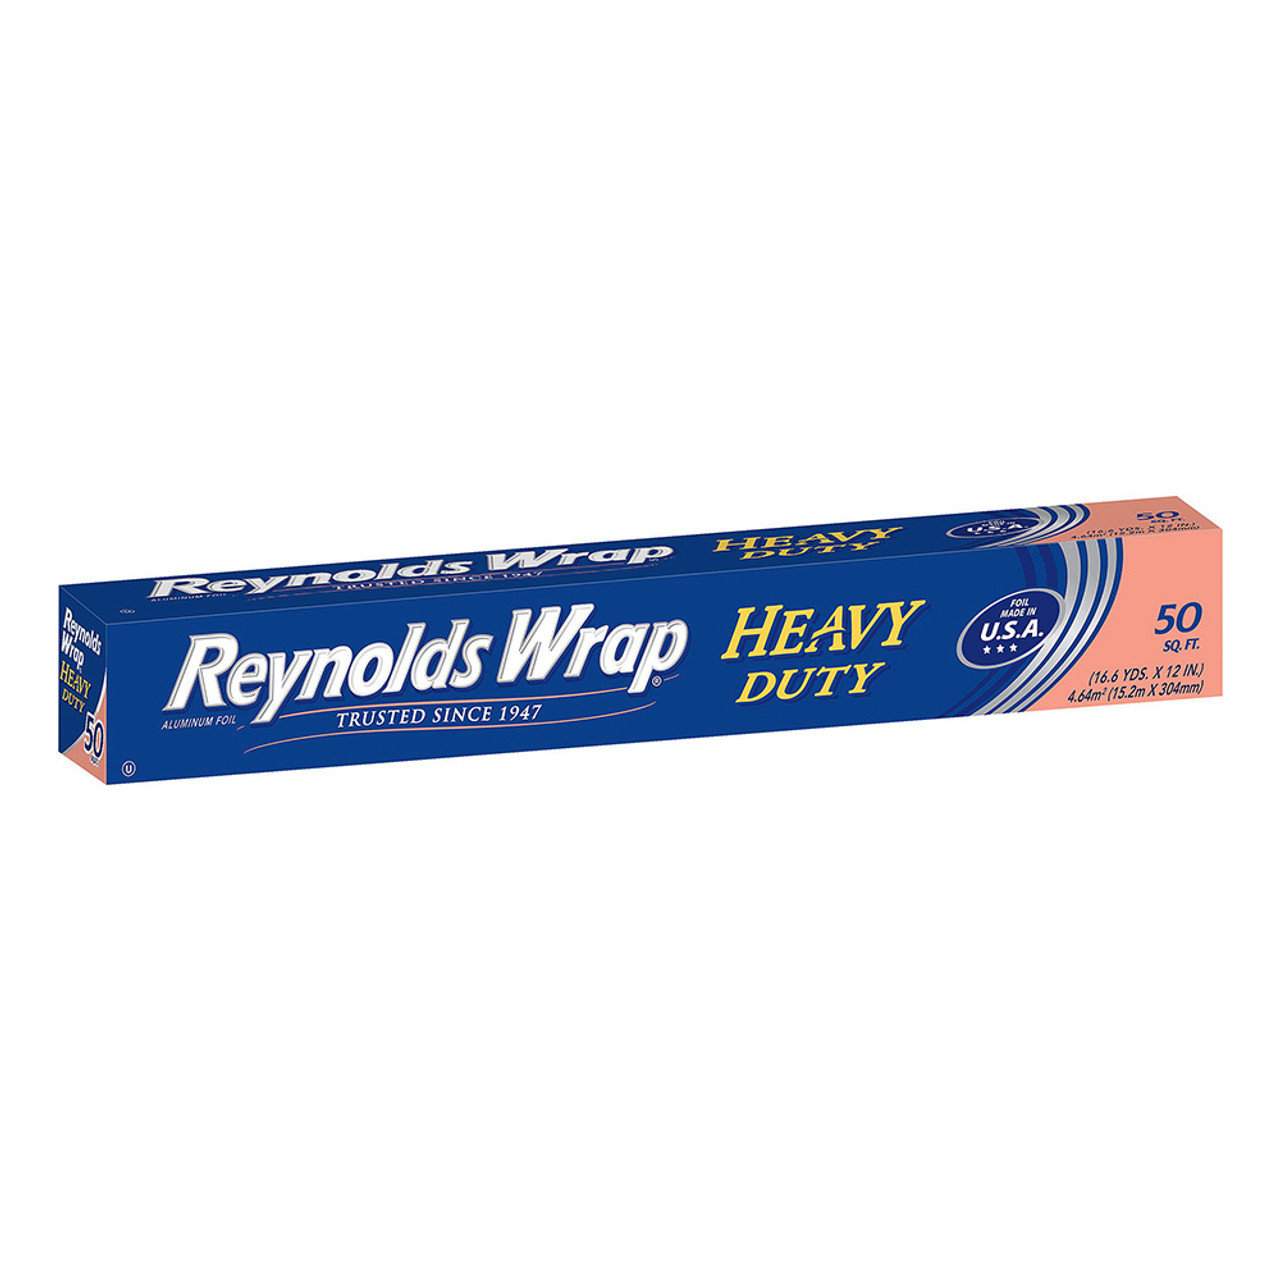 Reynolds Wrap Heavy Duty Aluminum Foil, Thick and Durable, 50